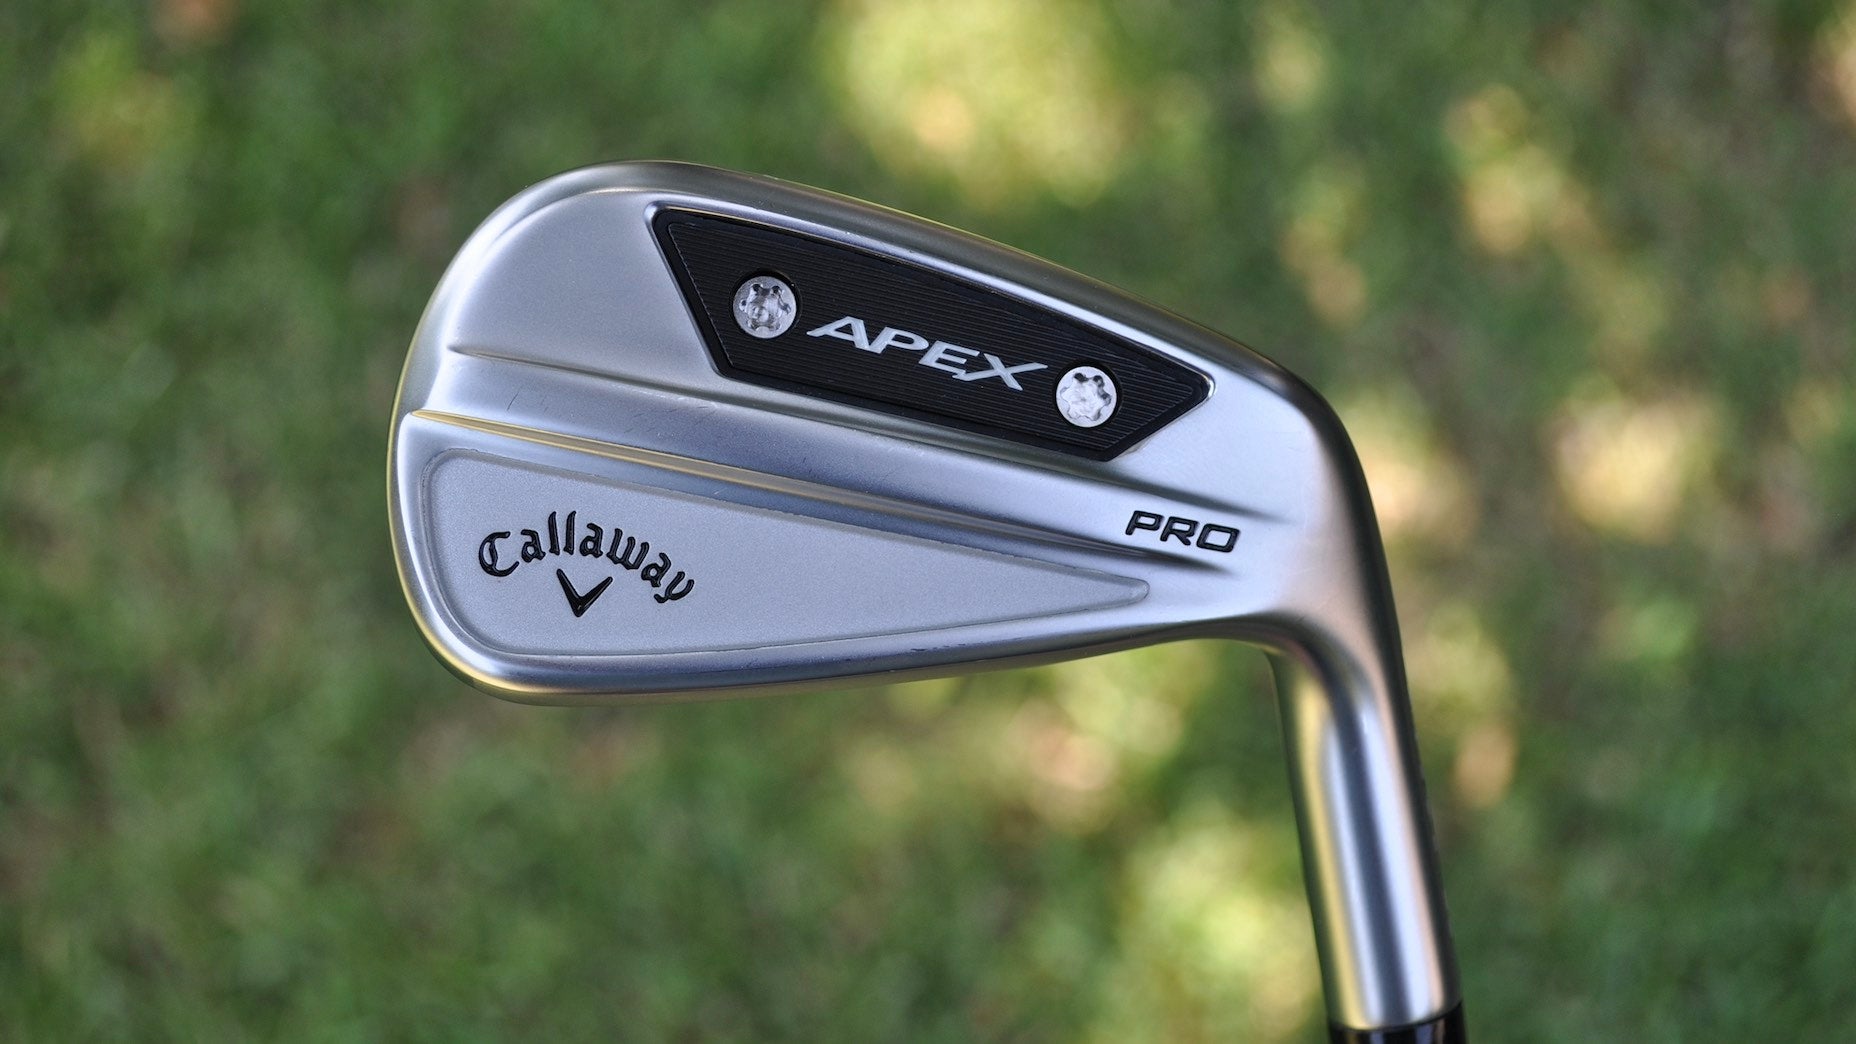 5 things you need to know about Callaway's revamped Apex iron line